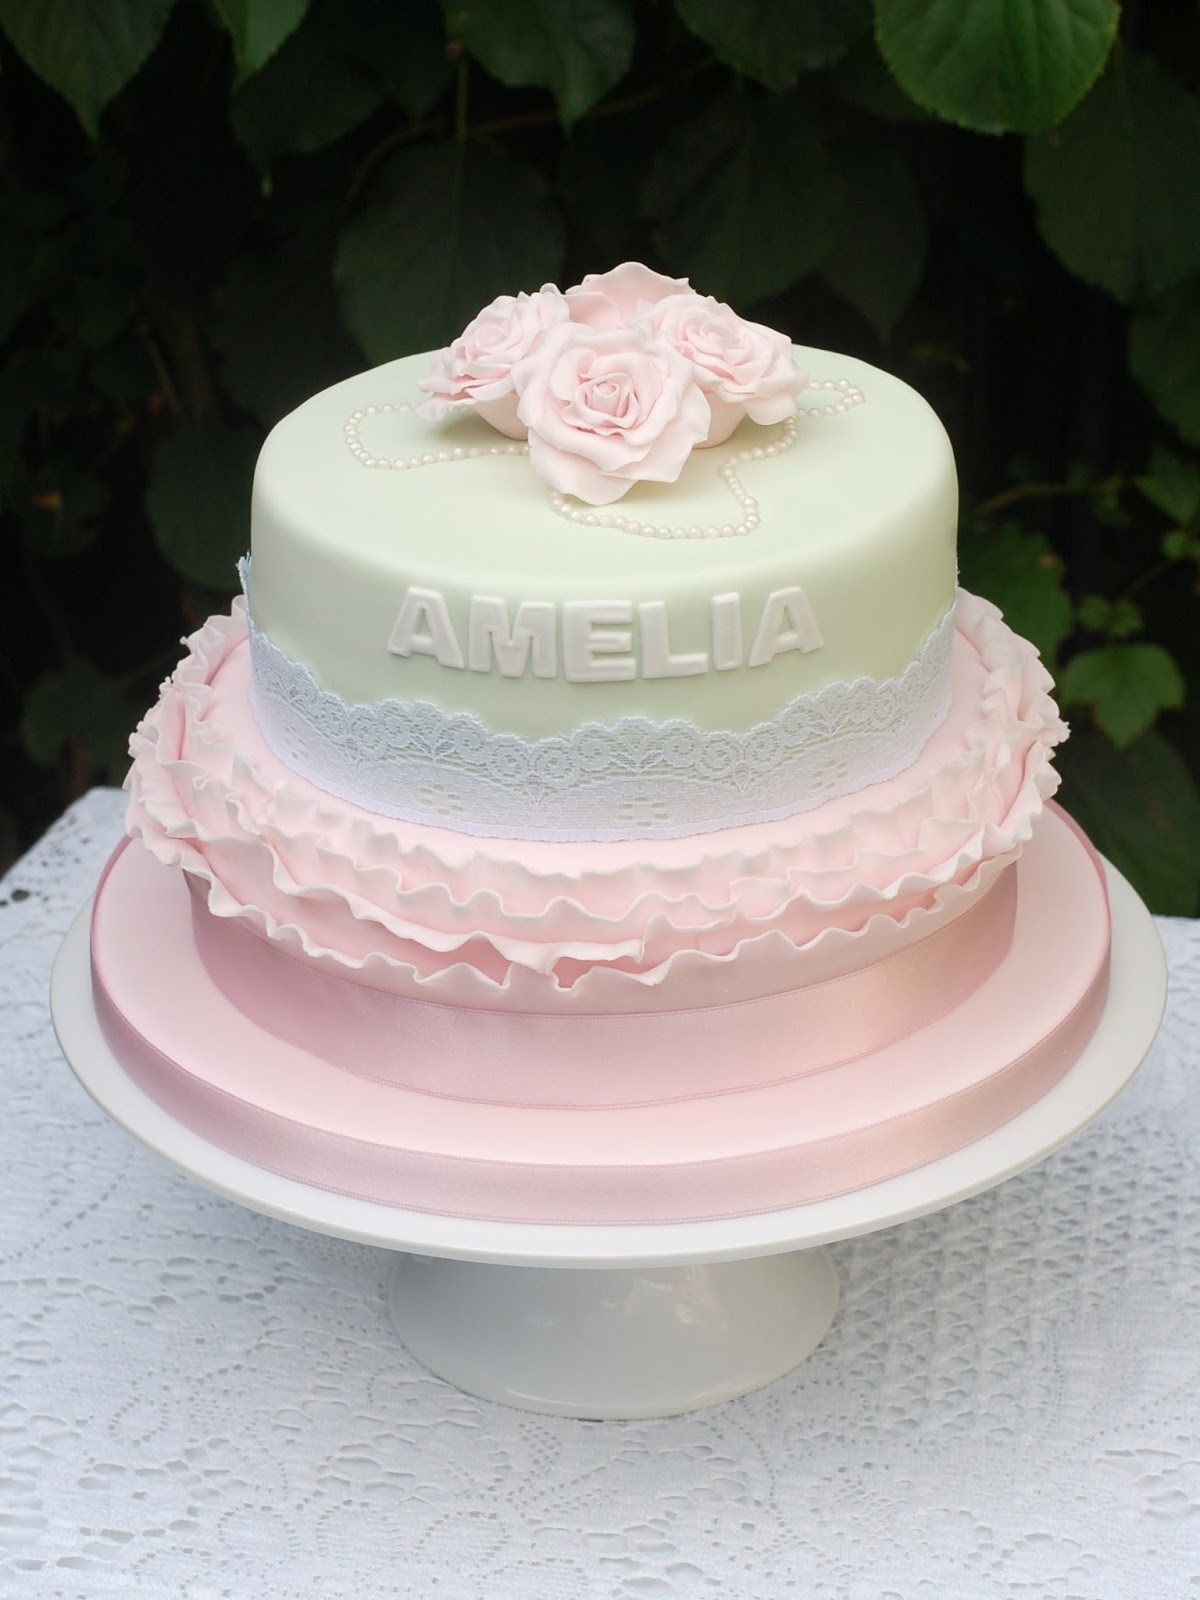 High Altitude Pastel Party Birthday Cake with Lambeth Piping - Curly Girl  Kitchen